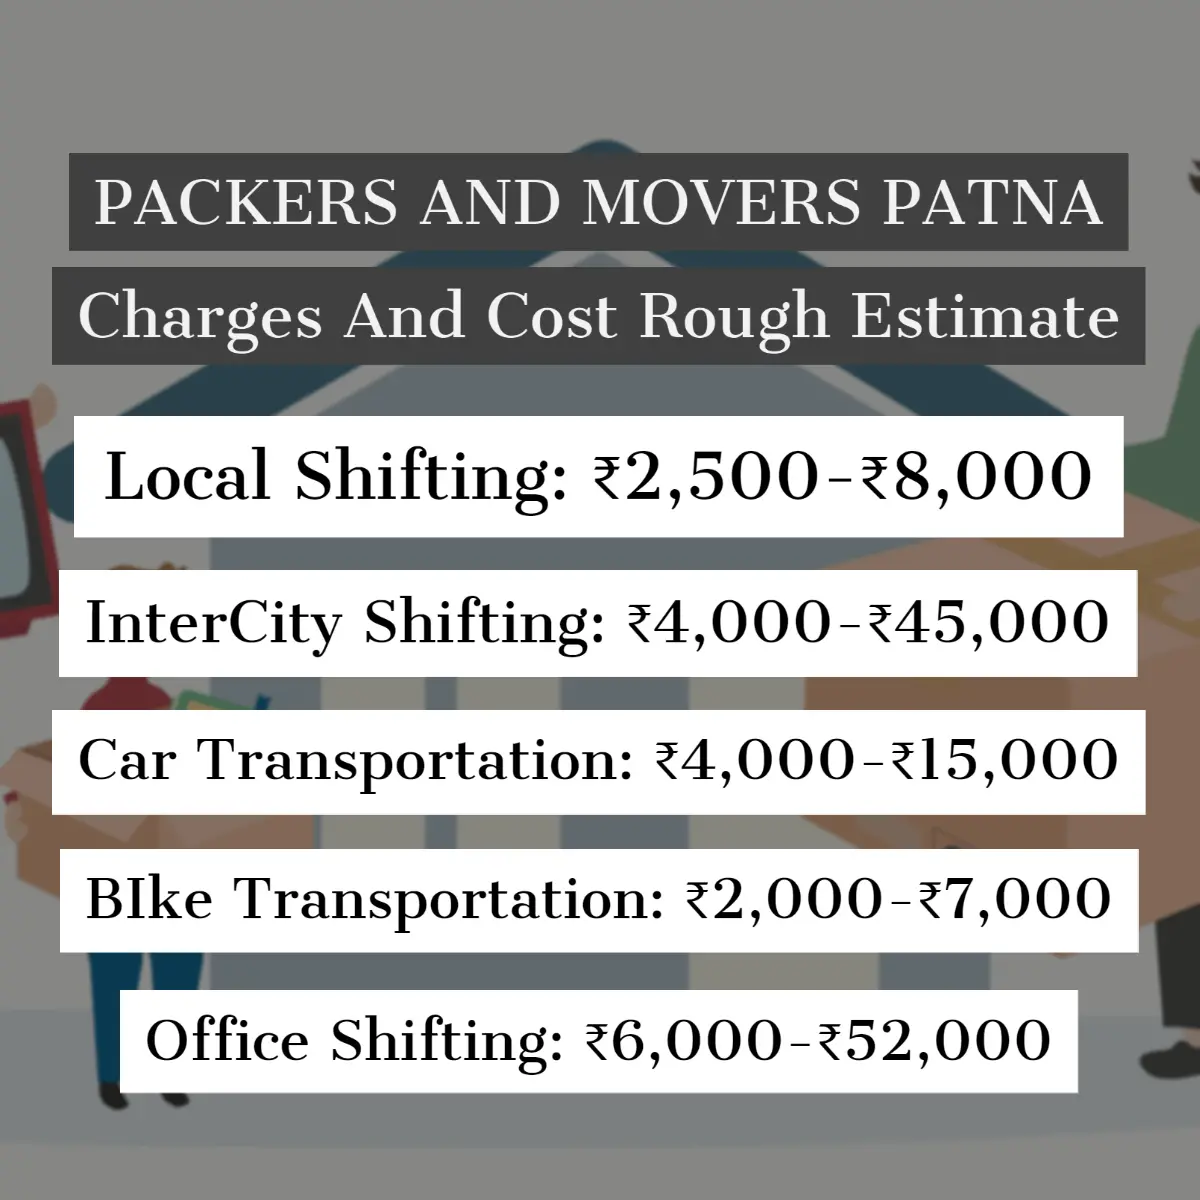 Packers and Movers Patna Charges